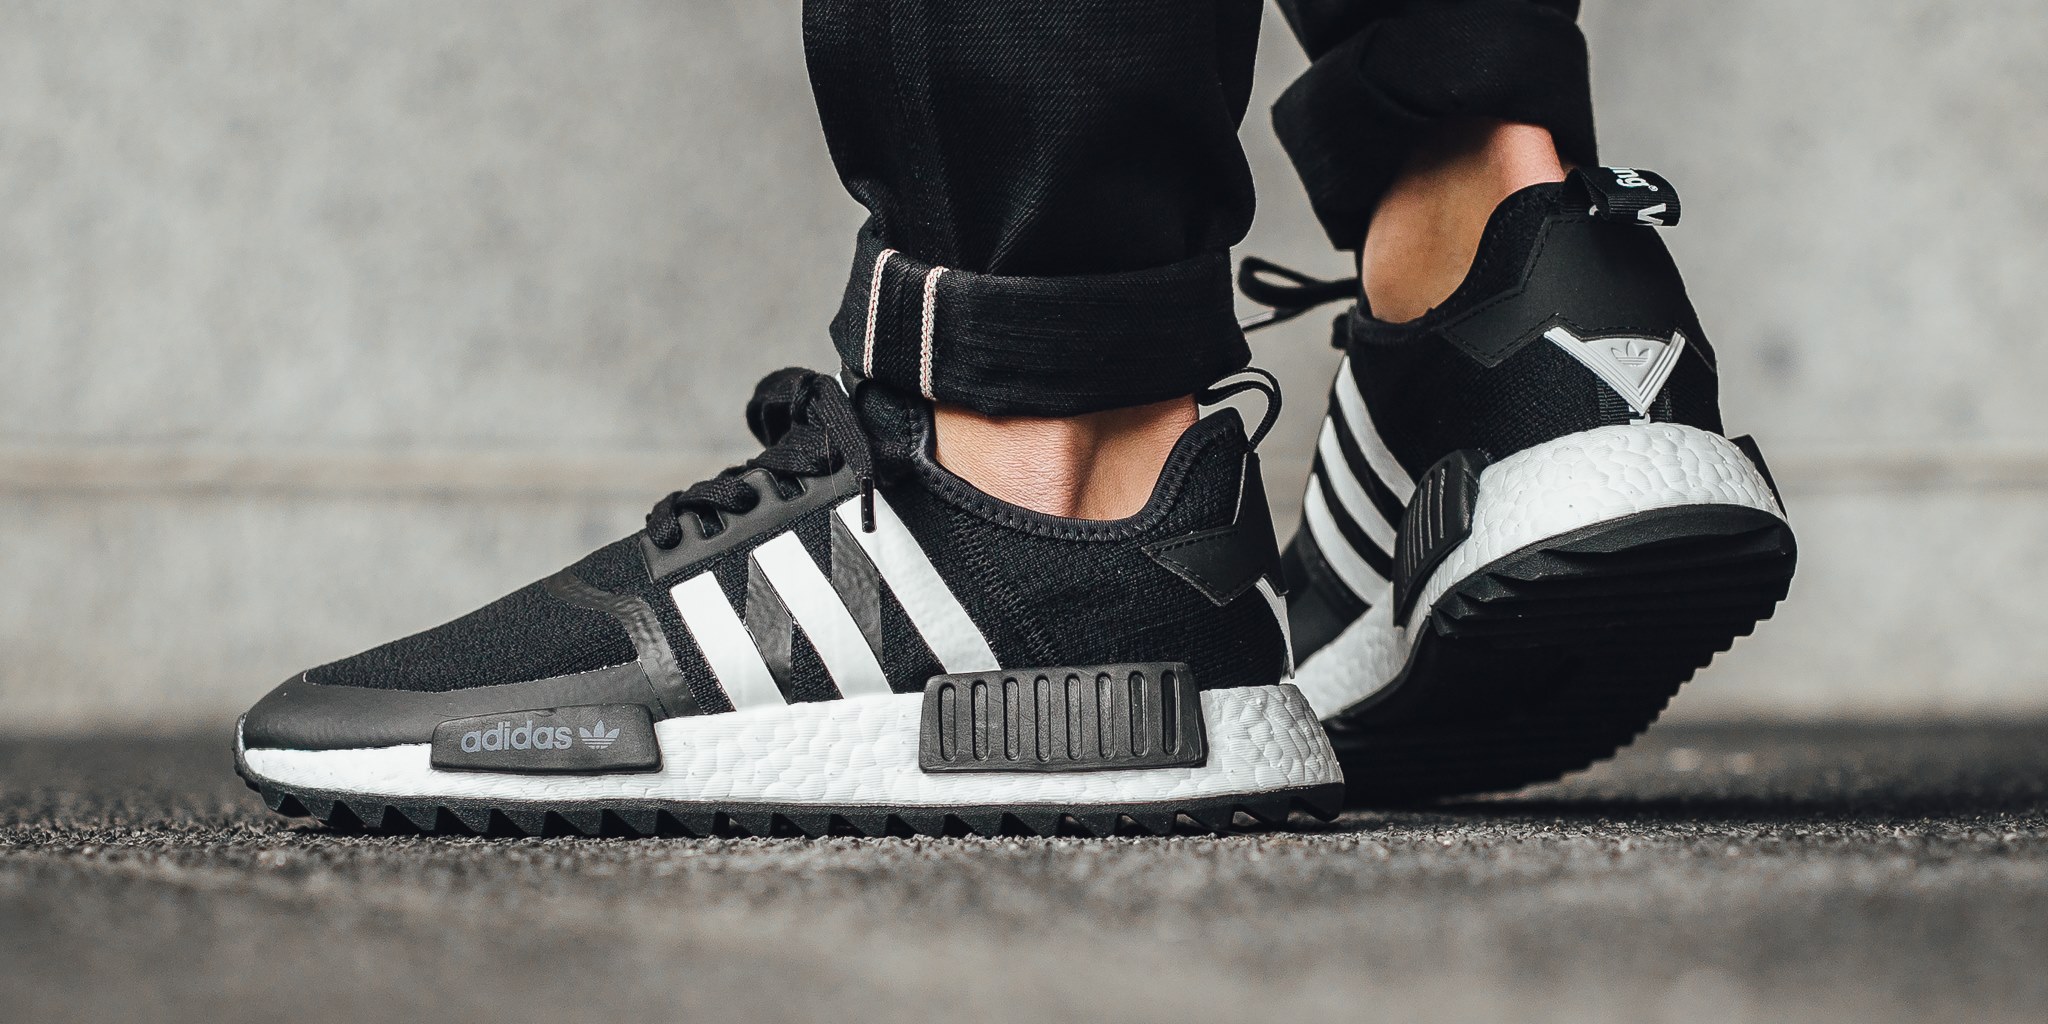 White Moutaineering x Adidas NMD Trail PK : Release Reminder | WAVE®